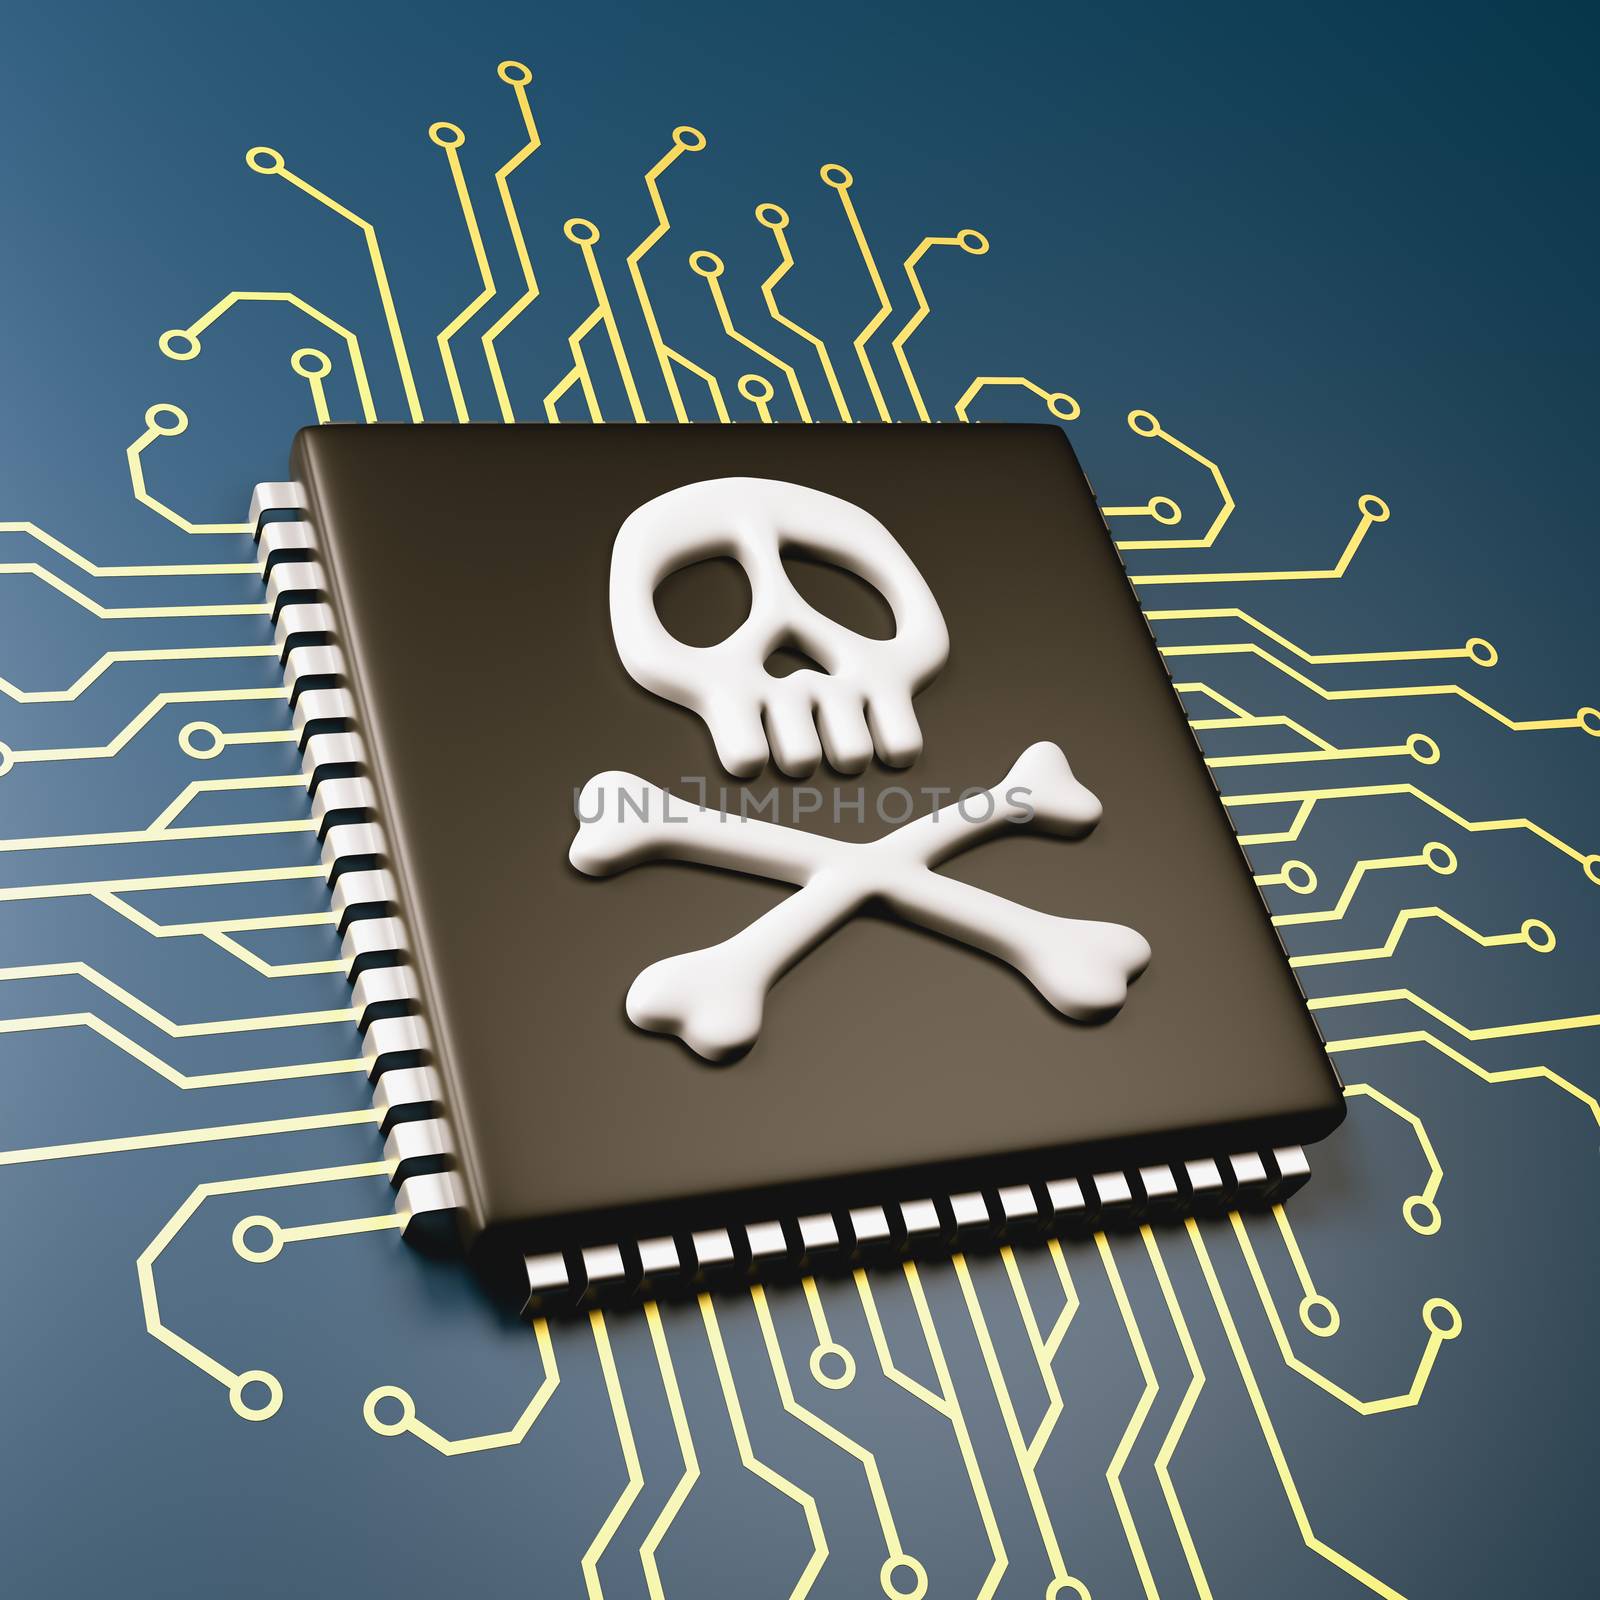 Computer Processor with Pirate Symbol Skull 3D Illustration, Security Concept